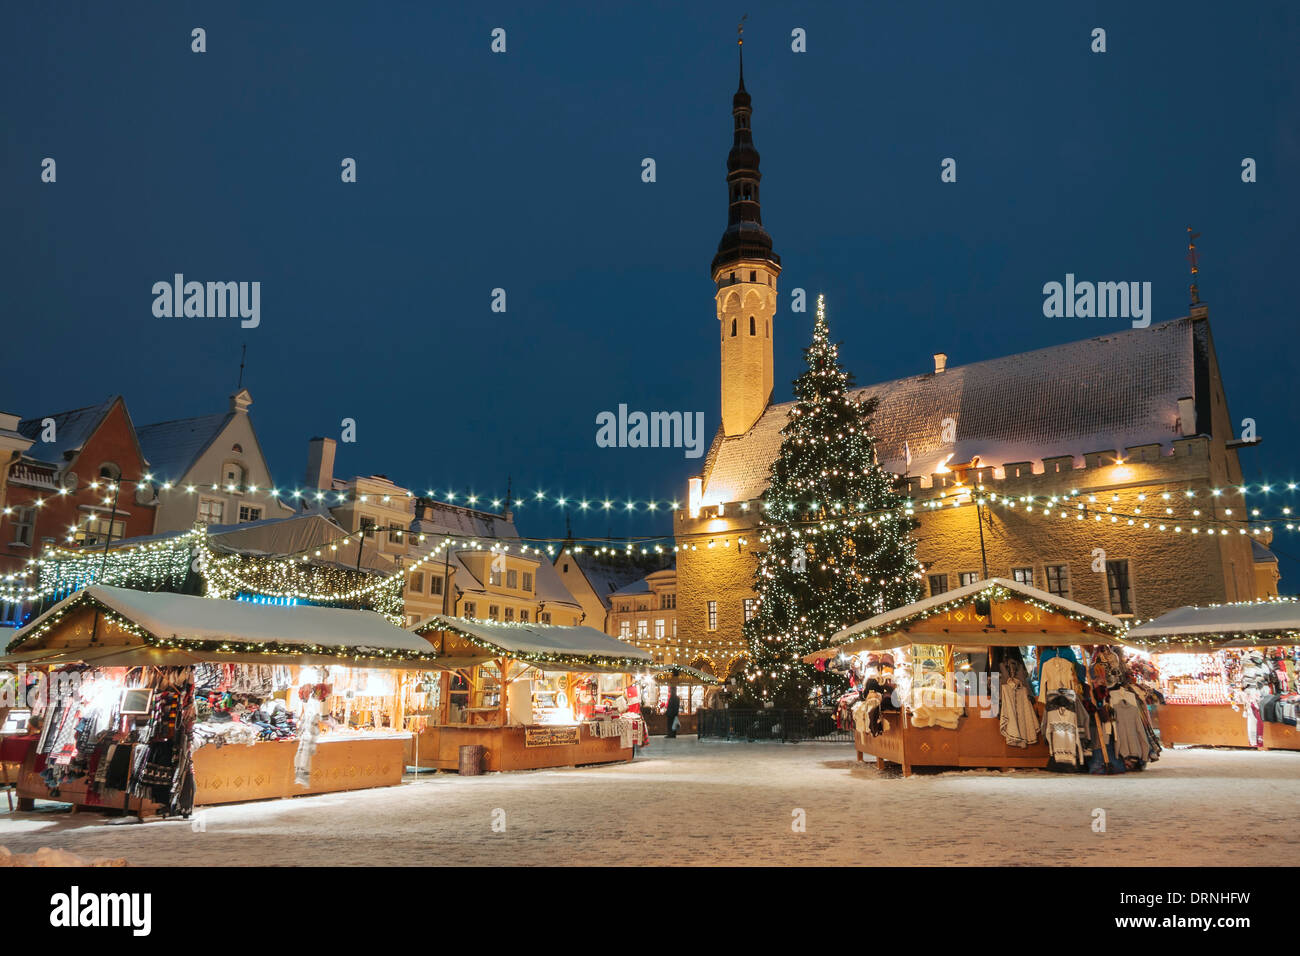 Christmas market at town hall square in the Old Town of Tallinn, Estonia Stock Photo